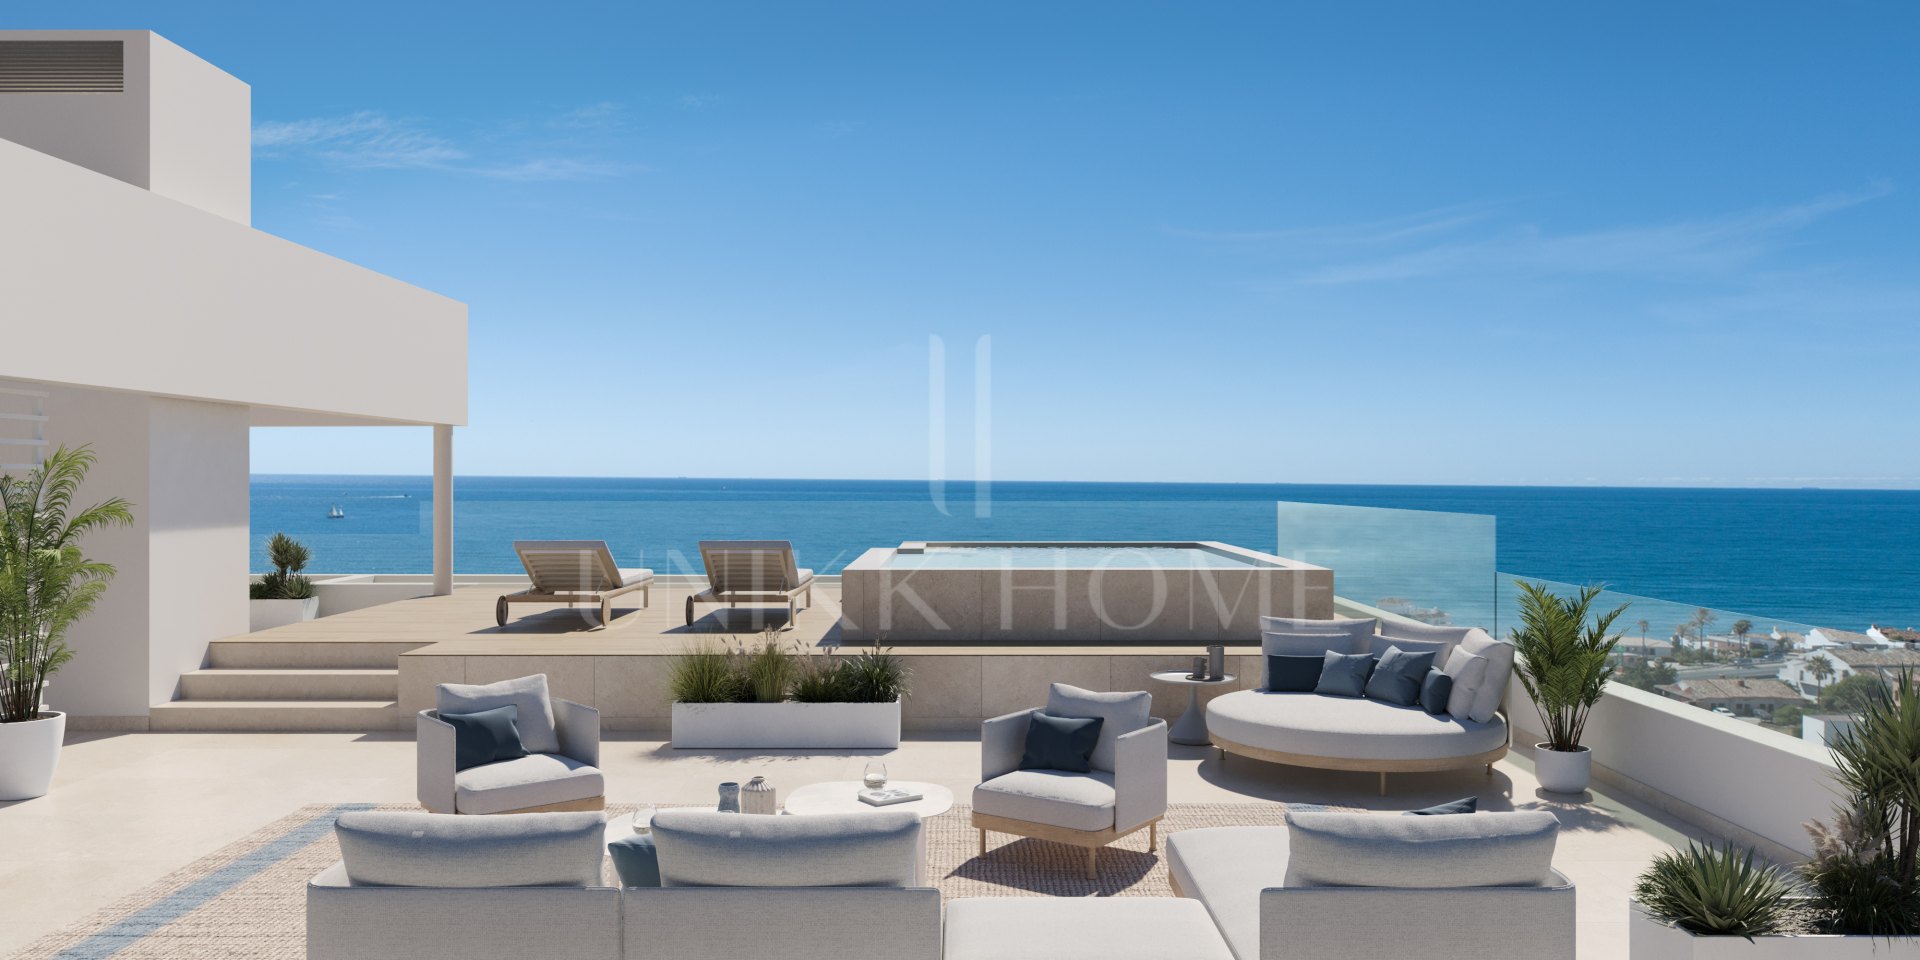 4 BEDROOM PENTHOUSE IN NEW COMPLEX WITH SEA VIEWS, WALKING DISTANCE TO THE BEACH